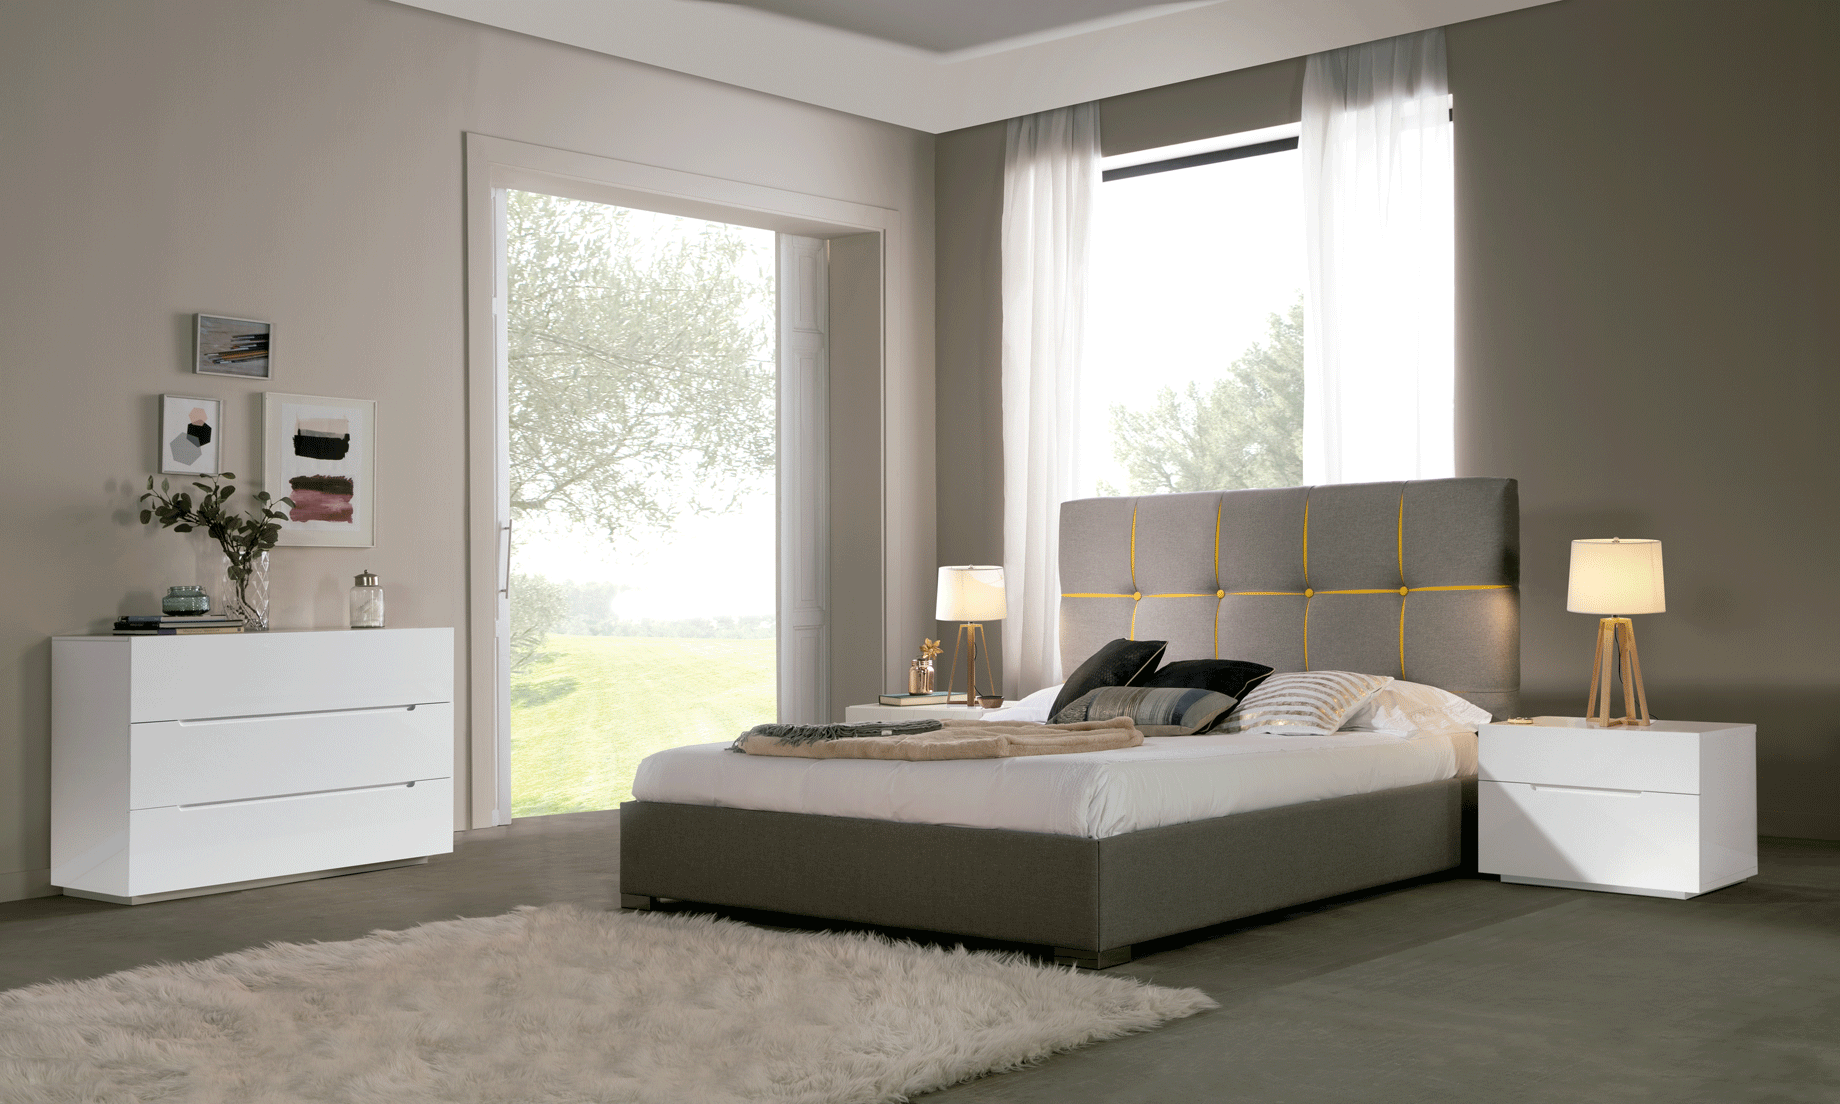 Bedroom Furniture Beds with storage Veronica Bedroom with Storage, M100, C100, E100